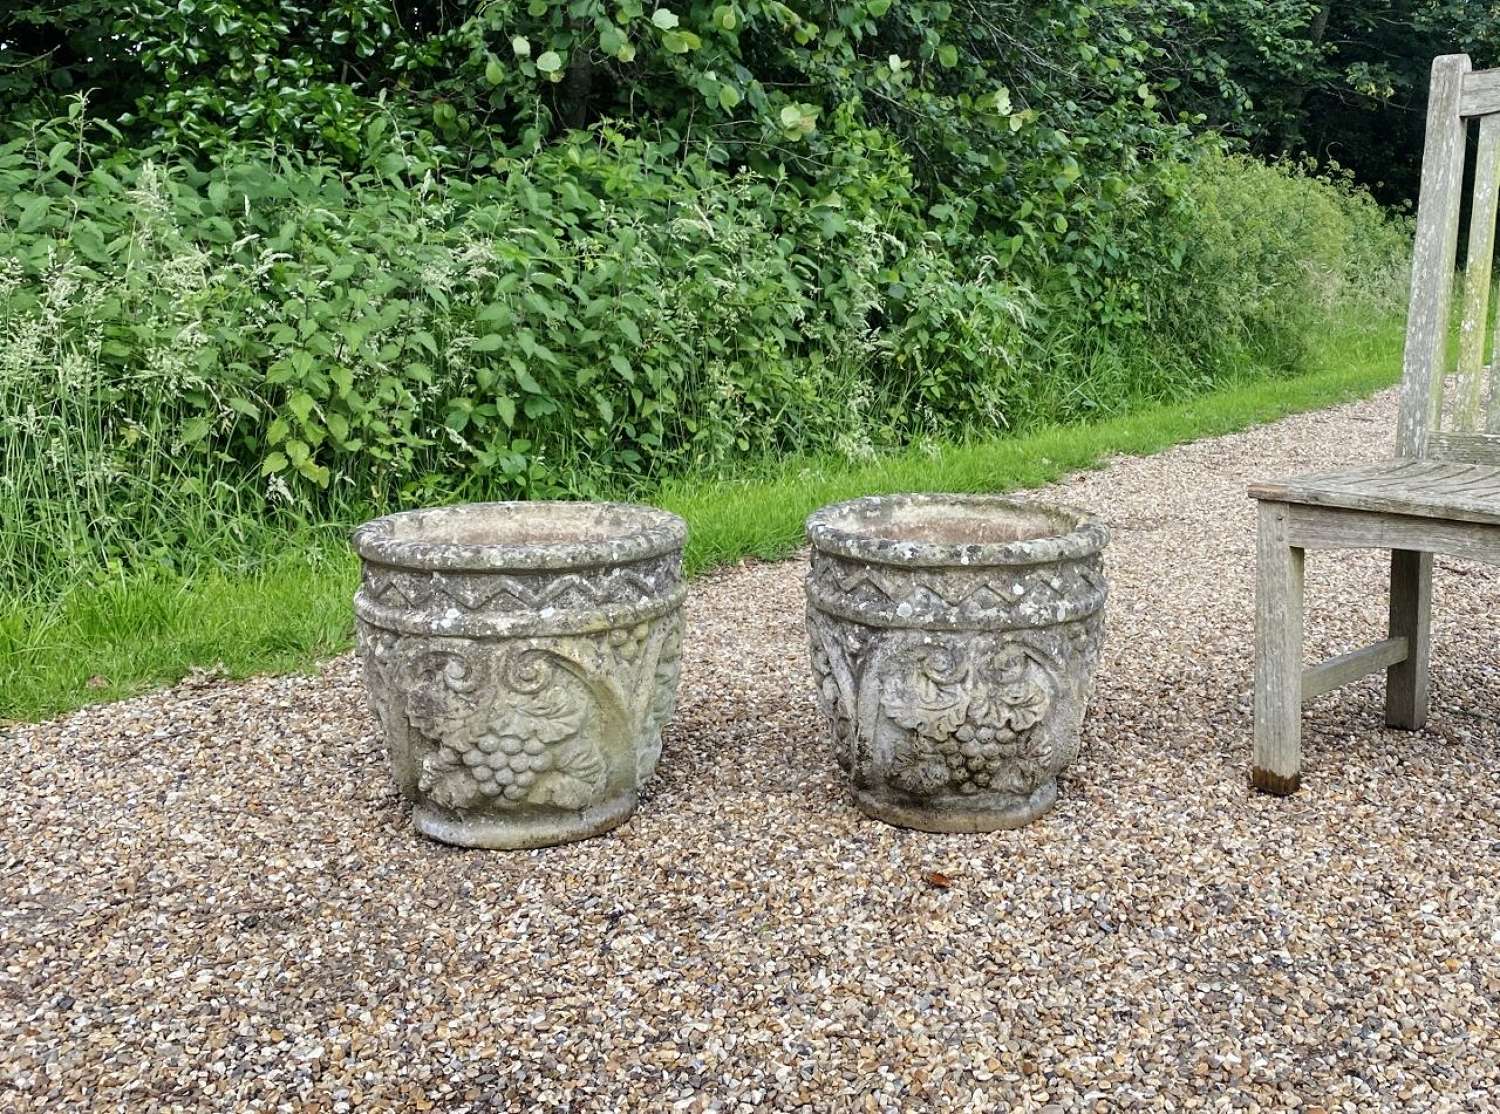 Pair of Patinated Decorative Planters